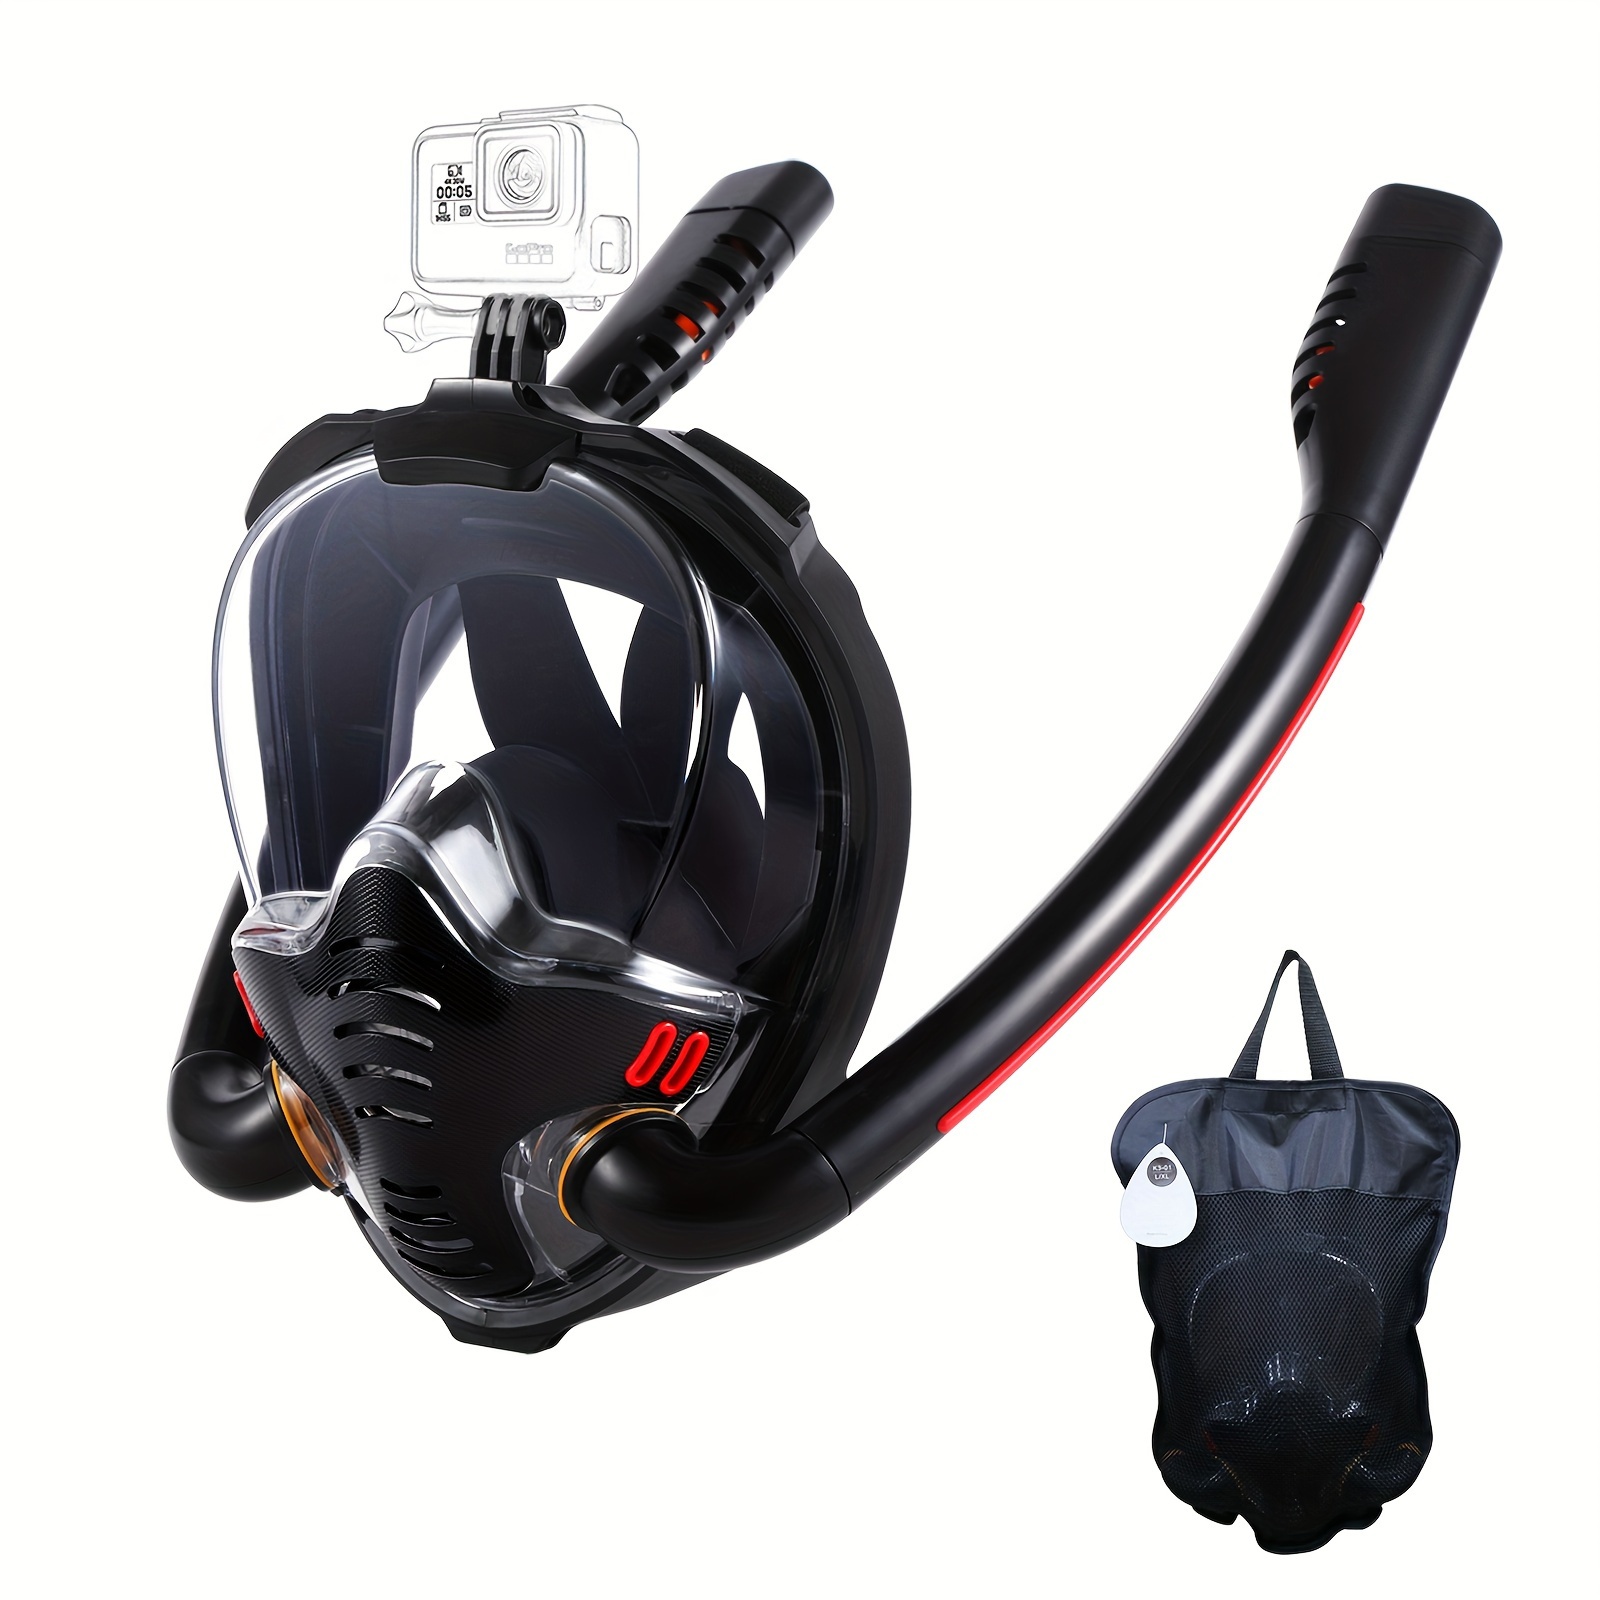 

Full Face Snorkel Mask, 180 Degree Panoramic Hd View Snorkeling Mask, Anti-leak Dry Top Set For Adults